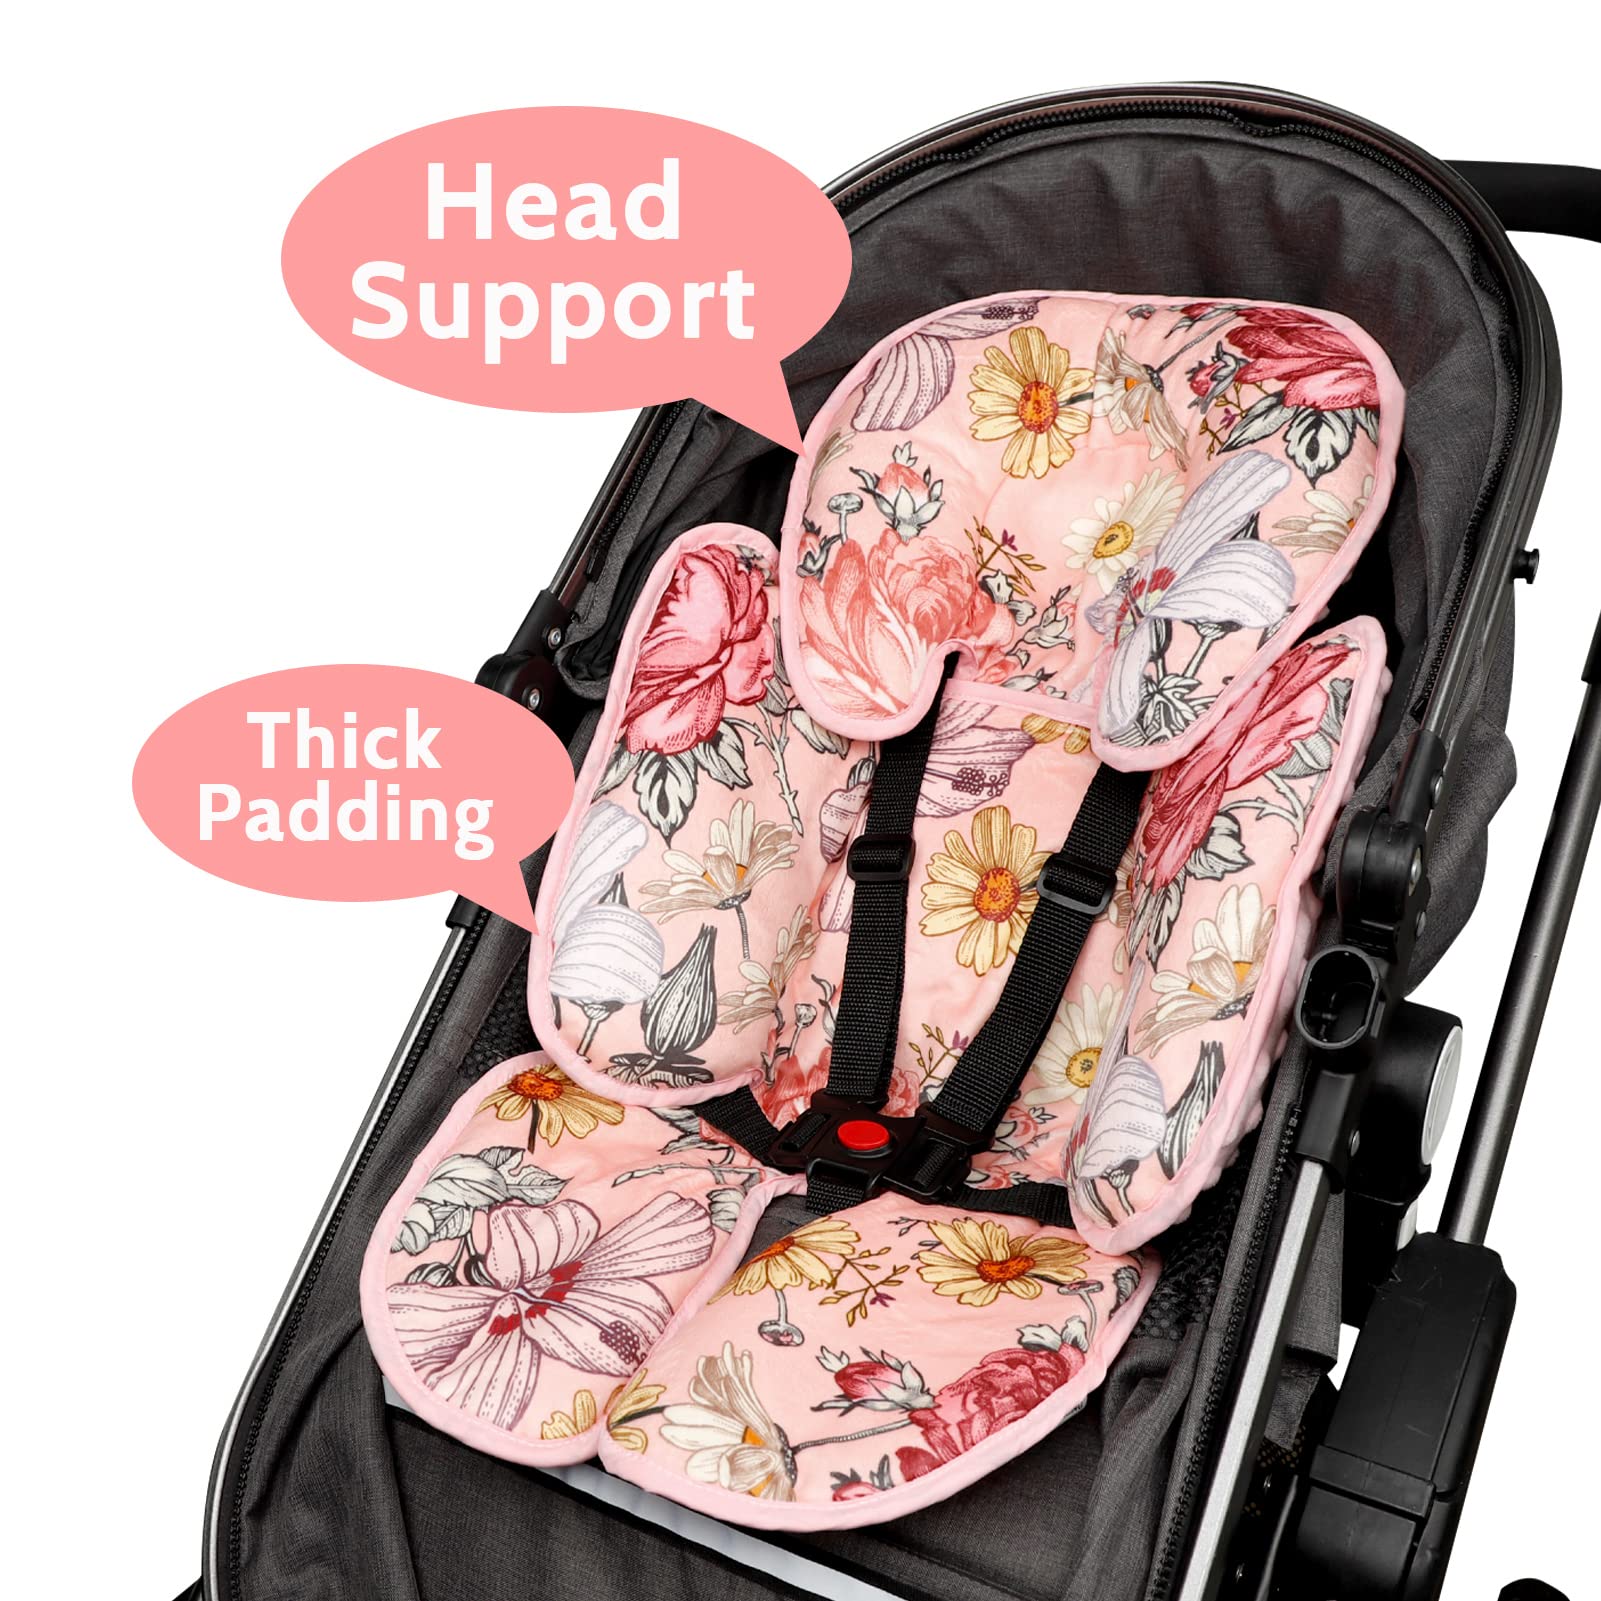 Pink Infant Car Seat Head Body Support Pillow,Baby Car Seat Cover Girls, Infant Carseat Canopy, Stretchy Multi- use Nursing Cover for Stroller/High Chair/Shopping Cart/Car Seat Canopies